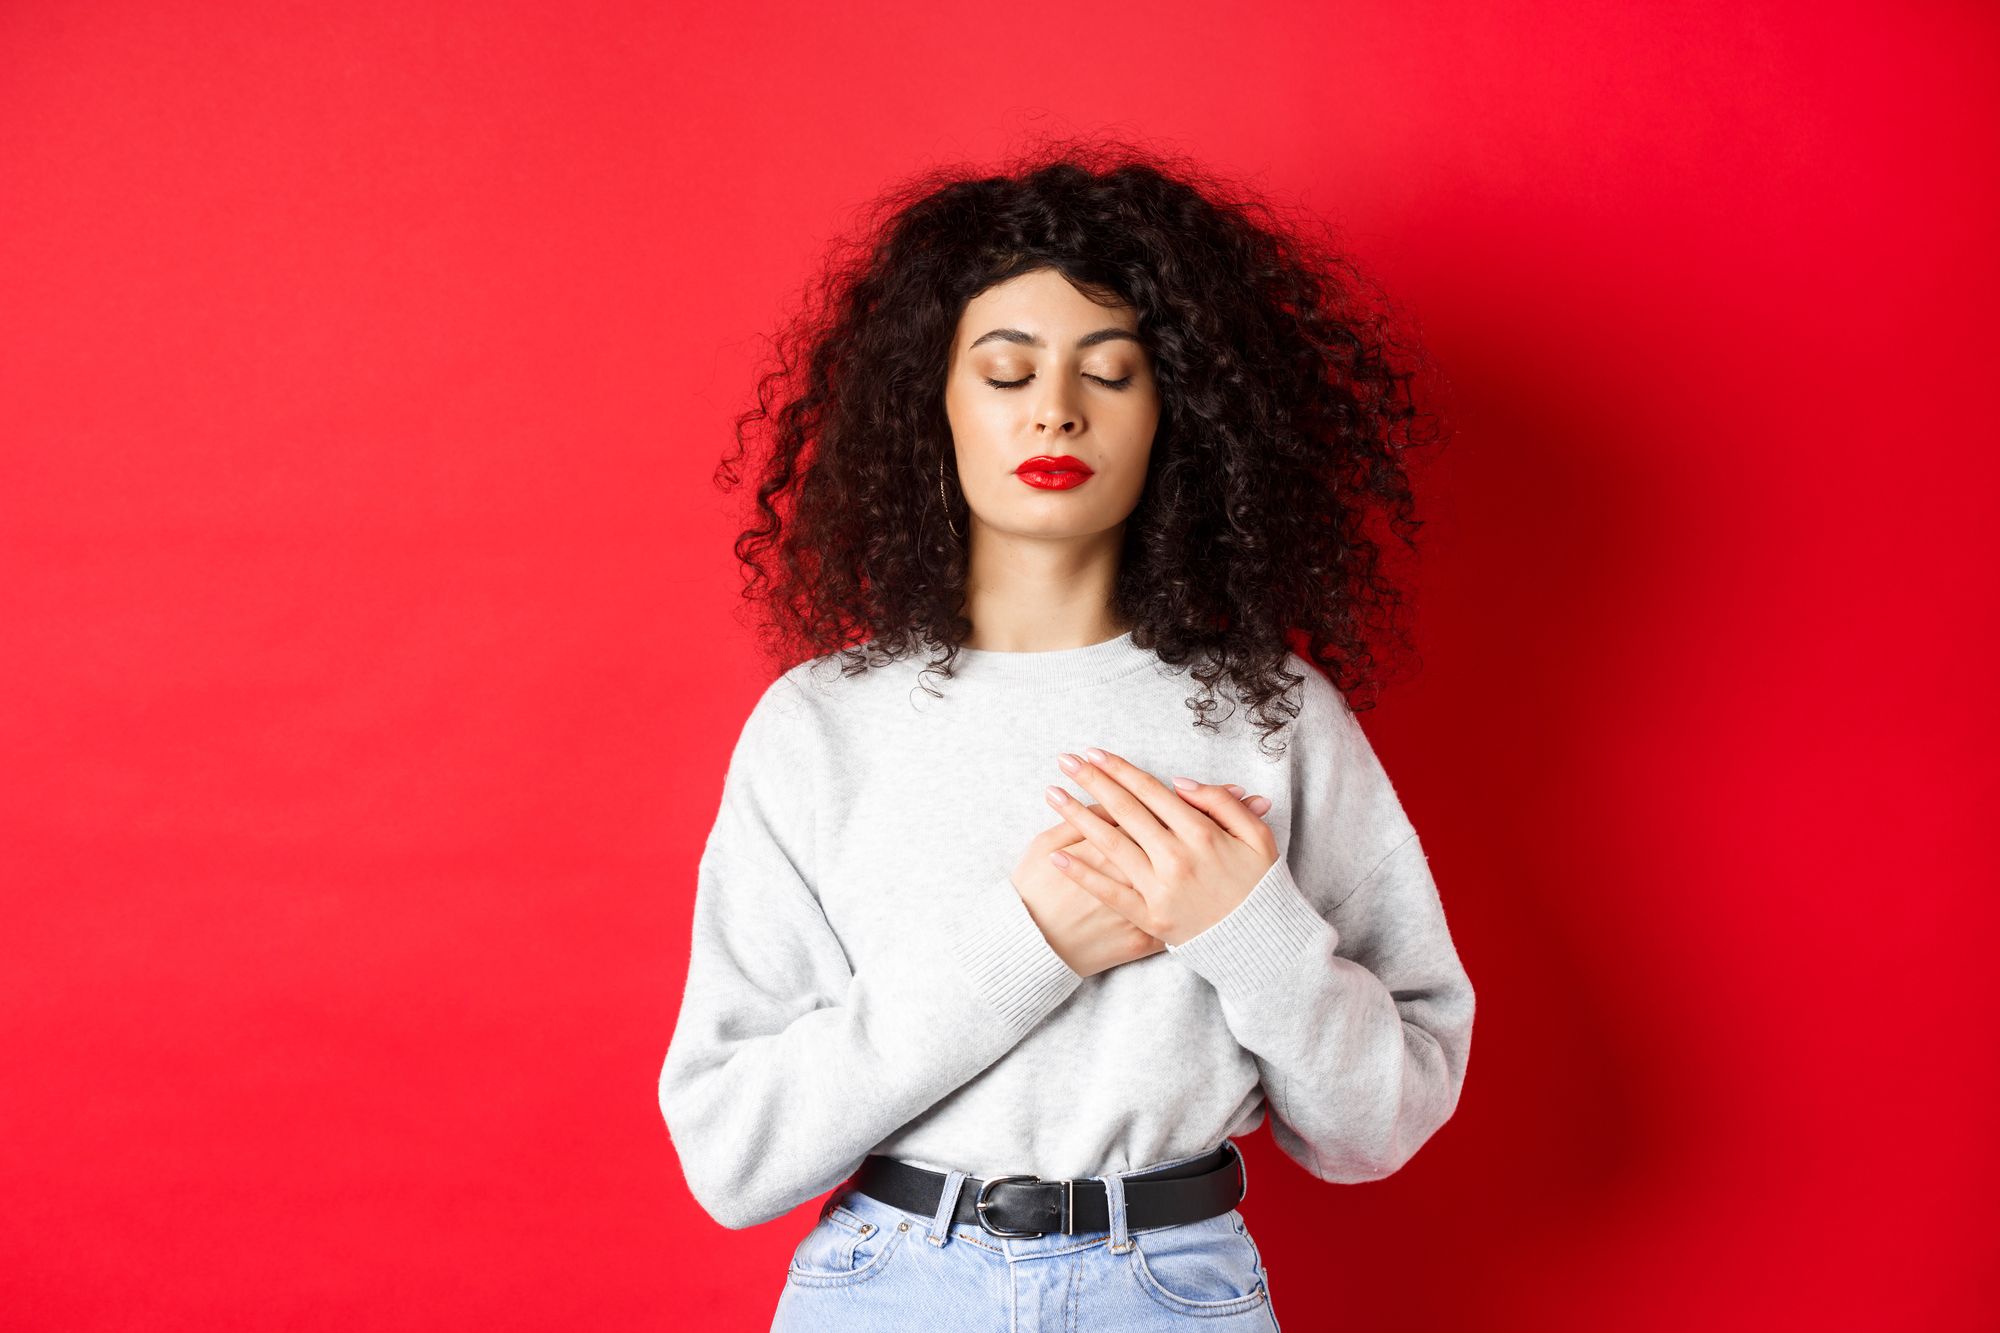 image-calm-young-woman-with-curly-hairsty-close-eyes-holding-hands-heart-keeping-warm-memories-feeling-nostalgic-standing-red-background.jpg